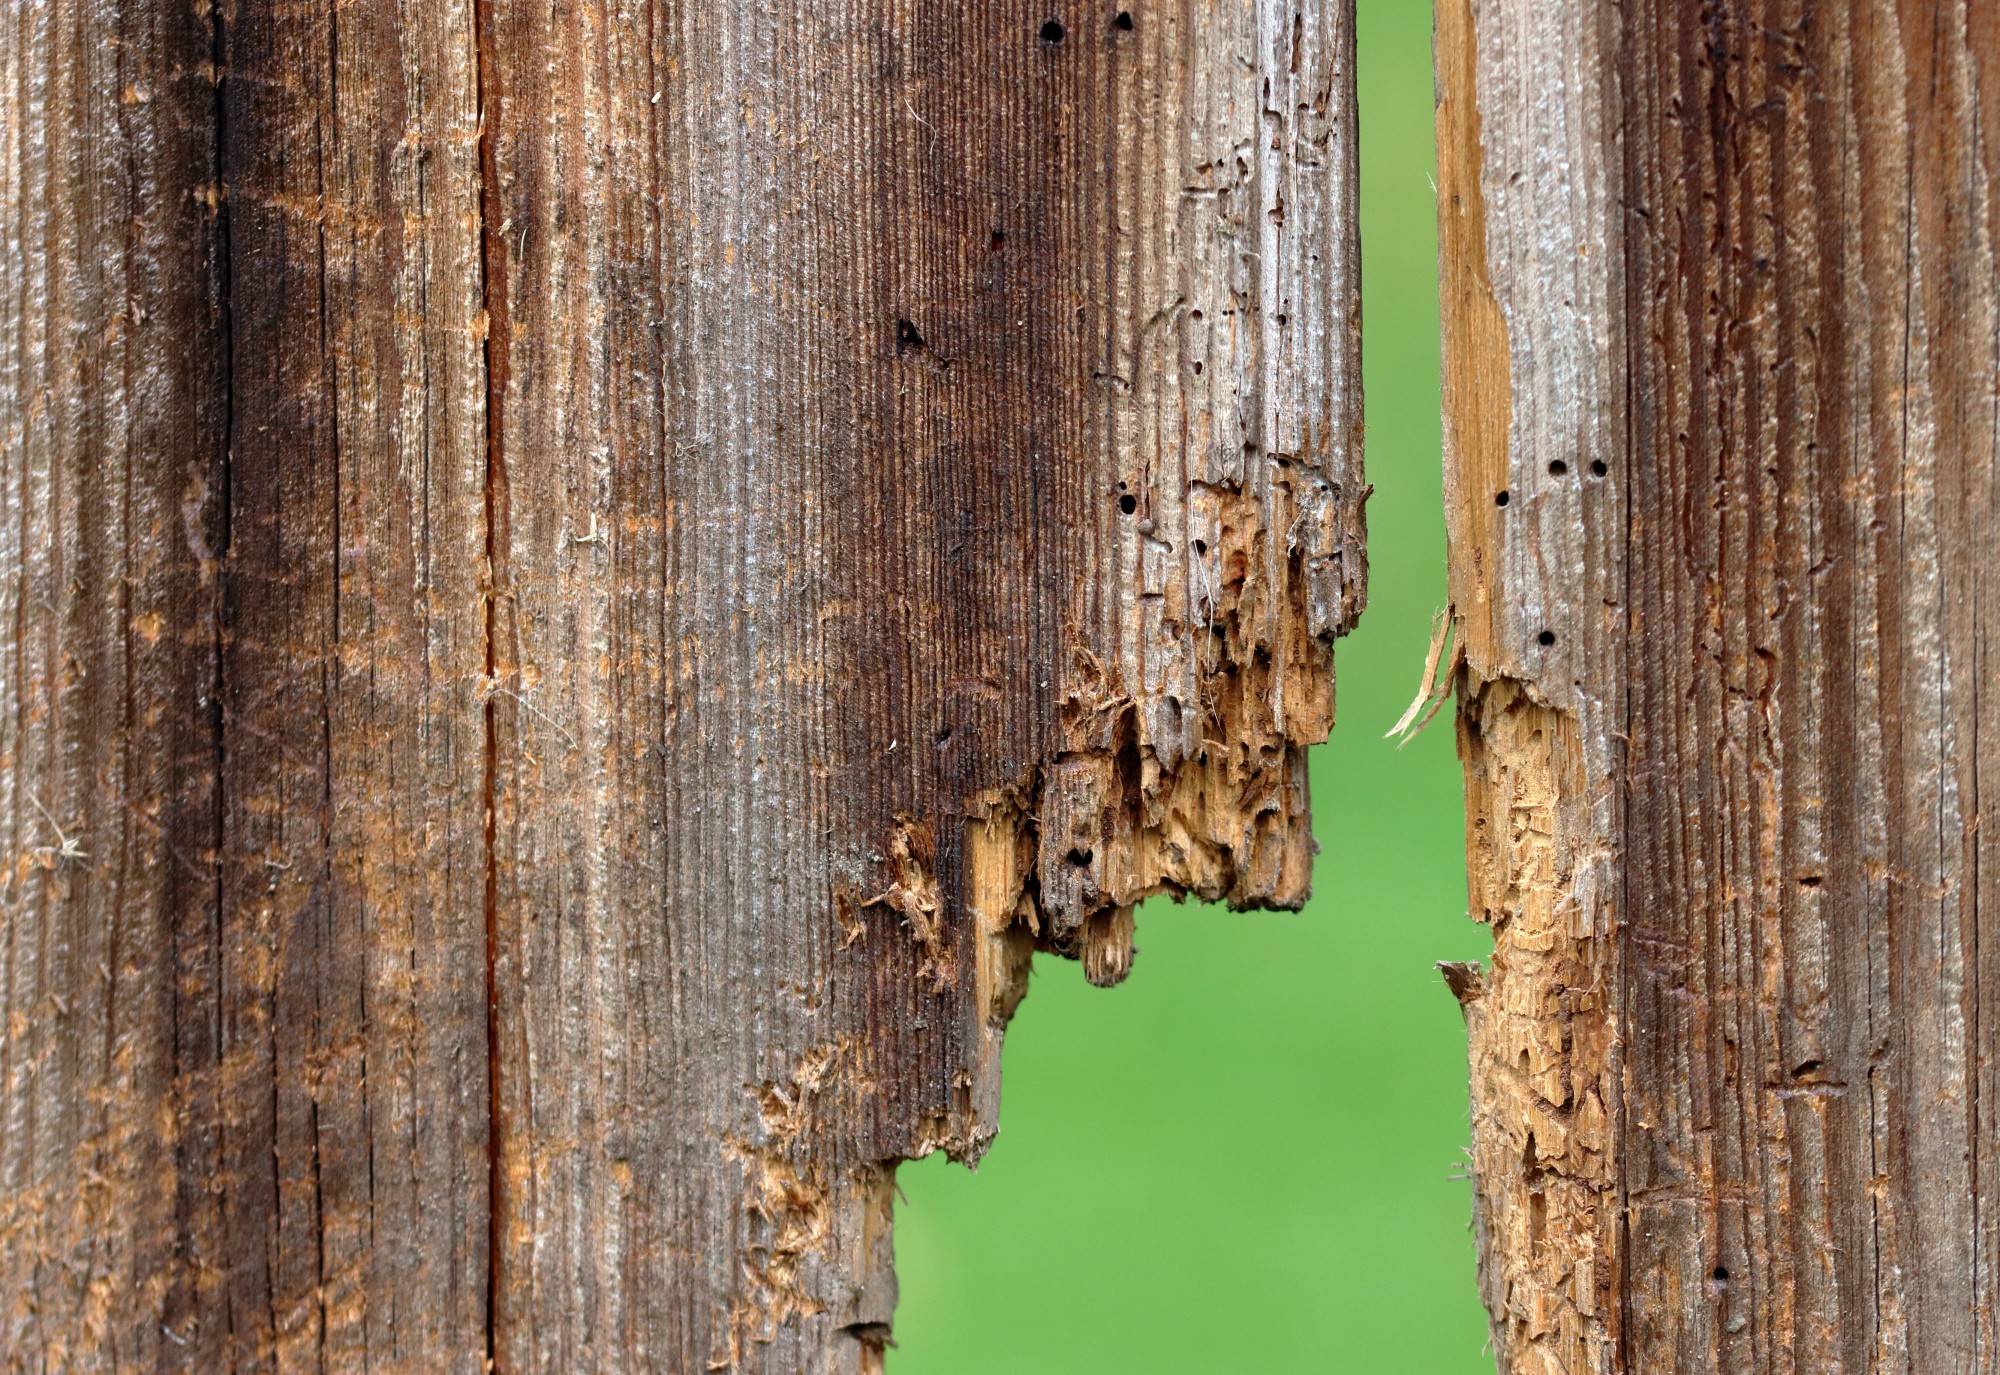 woodworm infestation how to identify and prevent damage